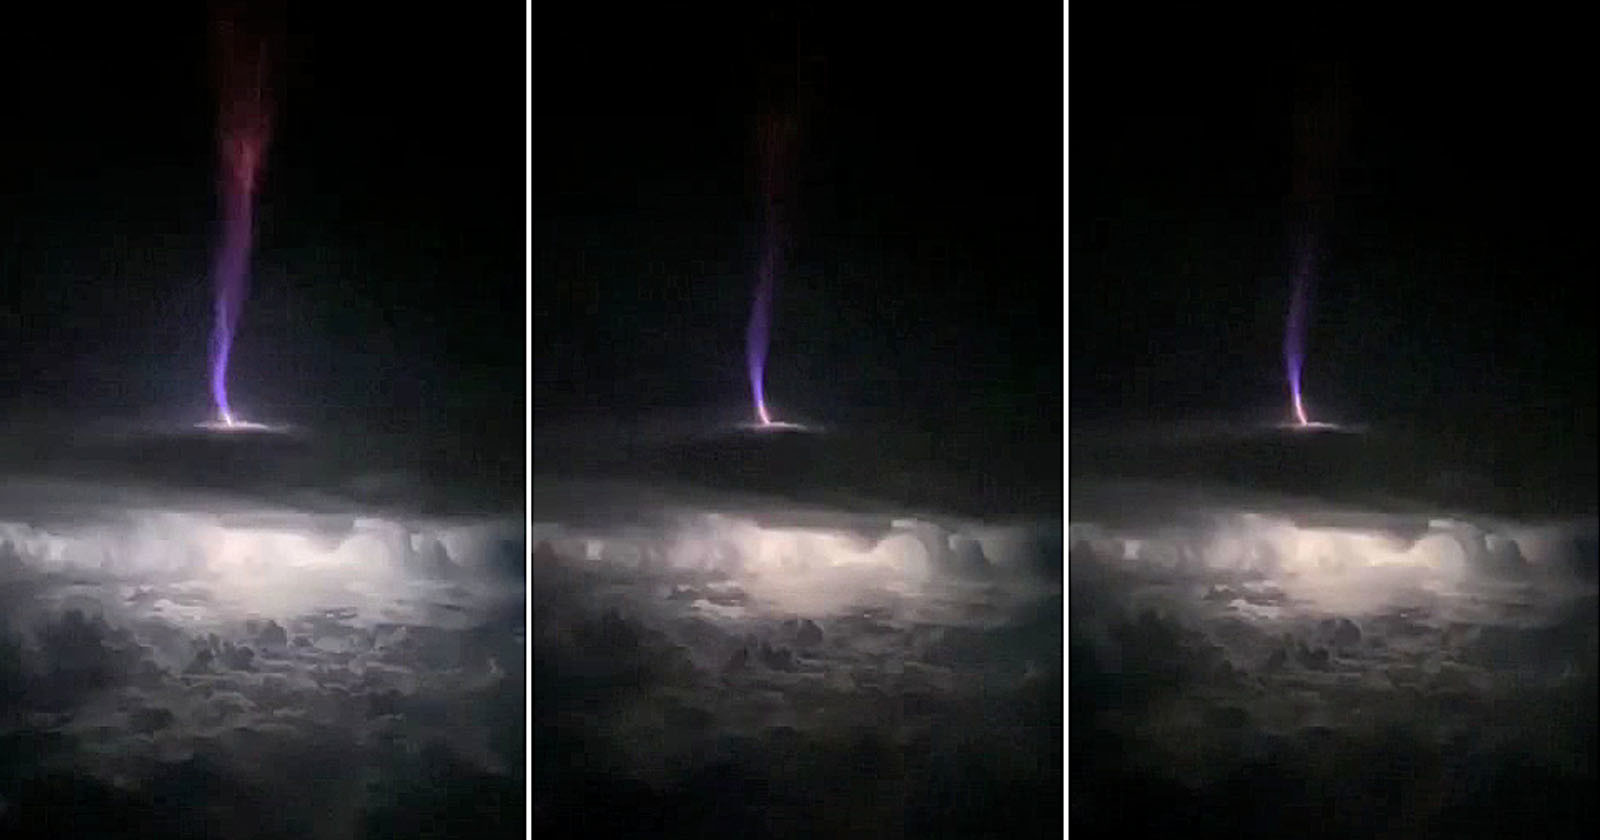 Scientists Reveal New Info on Giant Jets of Lightning in the Atmosphere